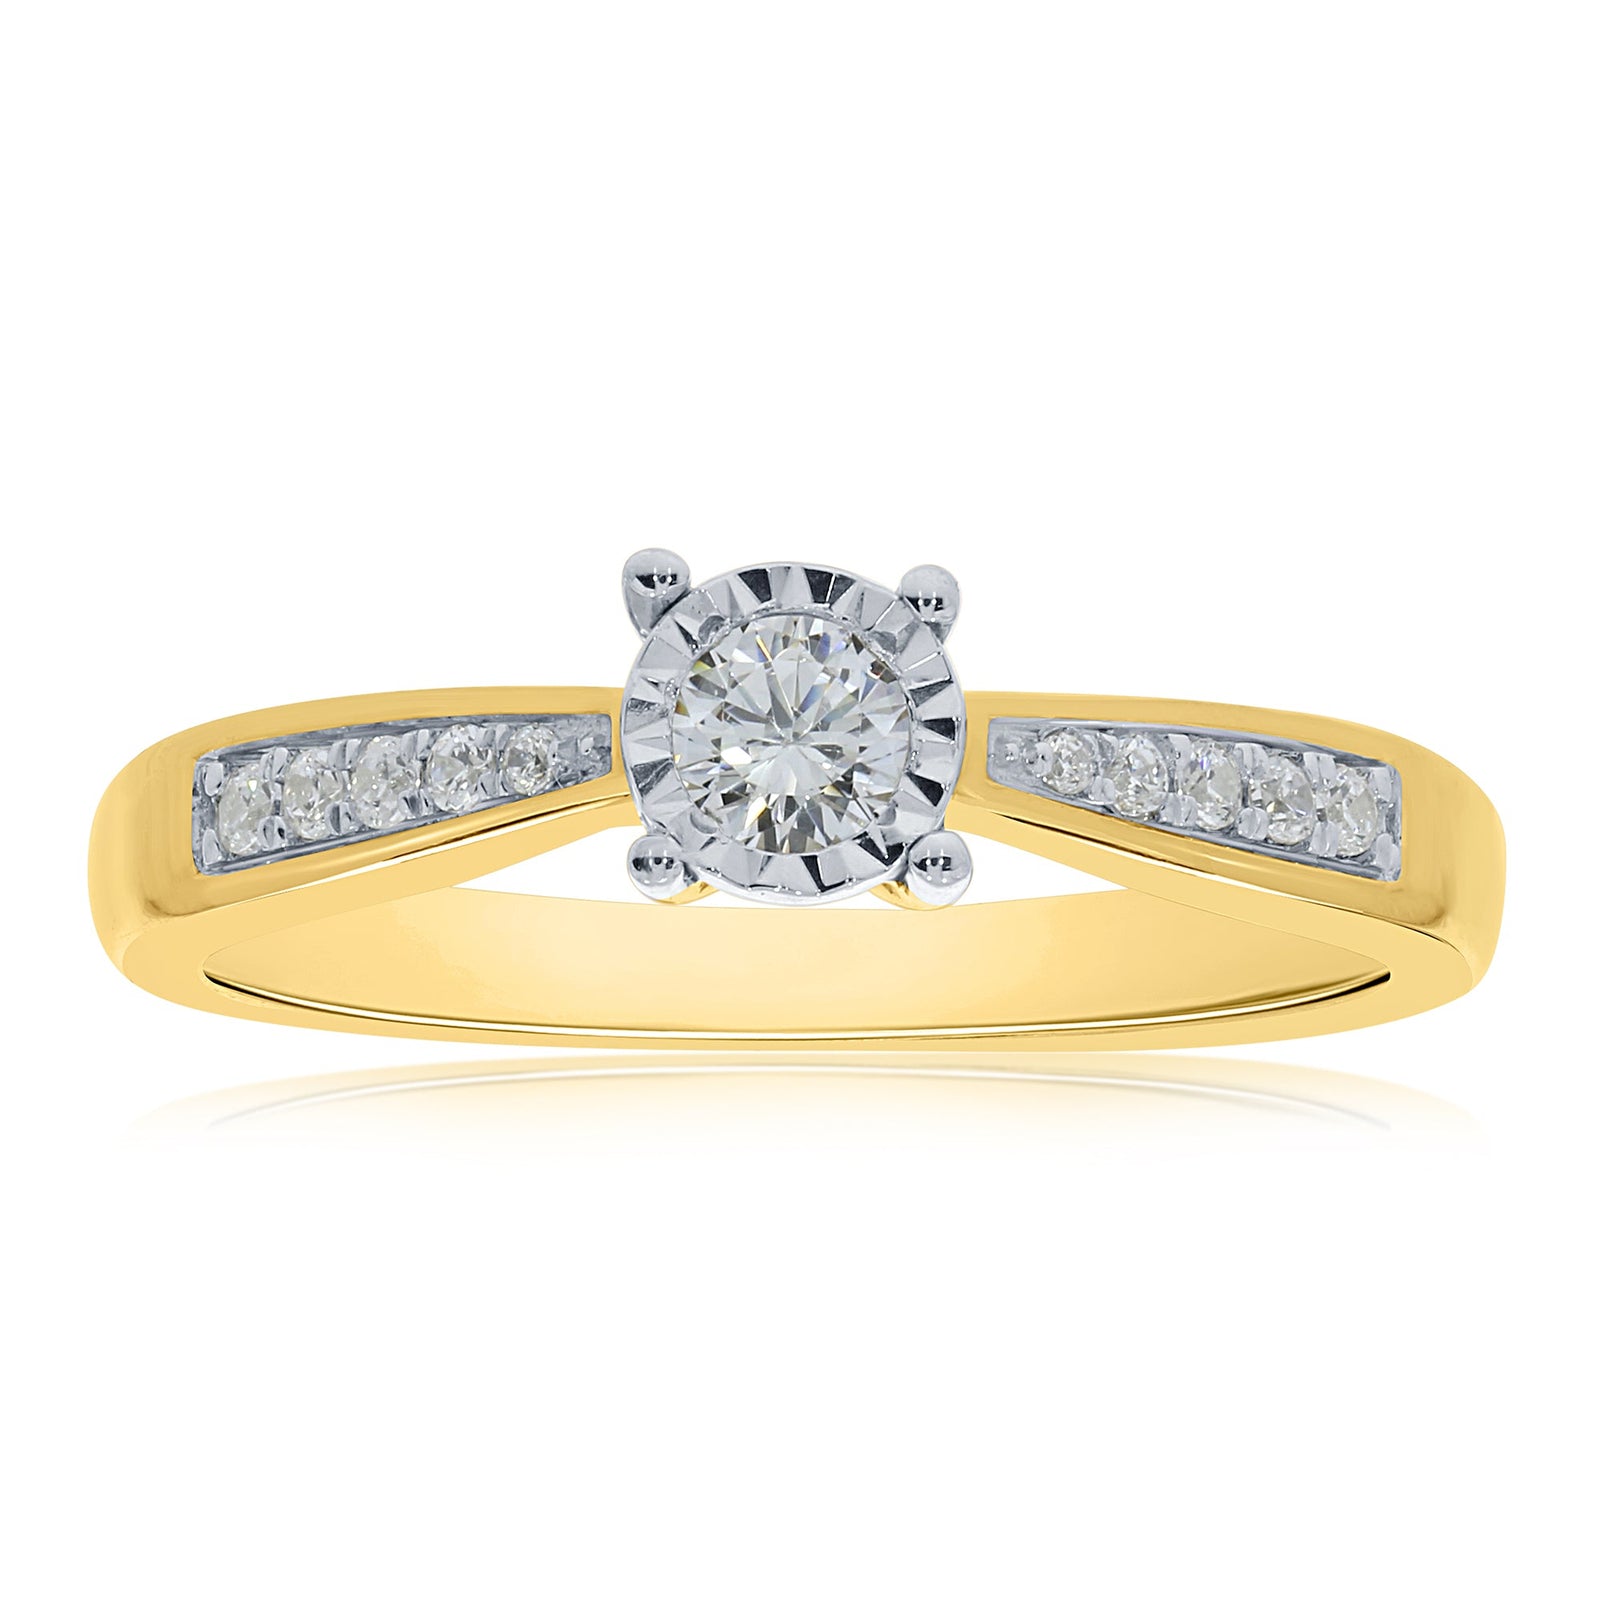 9ct gold single stone miracle plate diamond ring with diamond shoulders 0.33ct